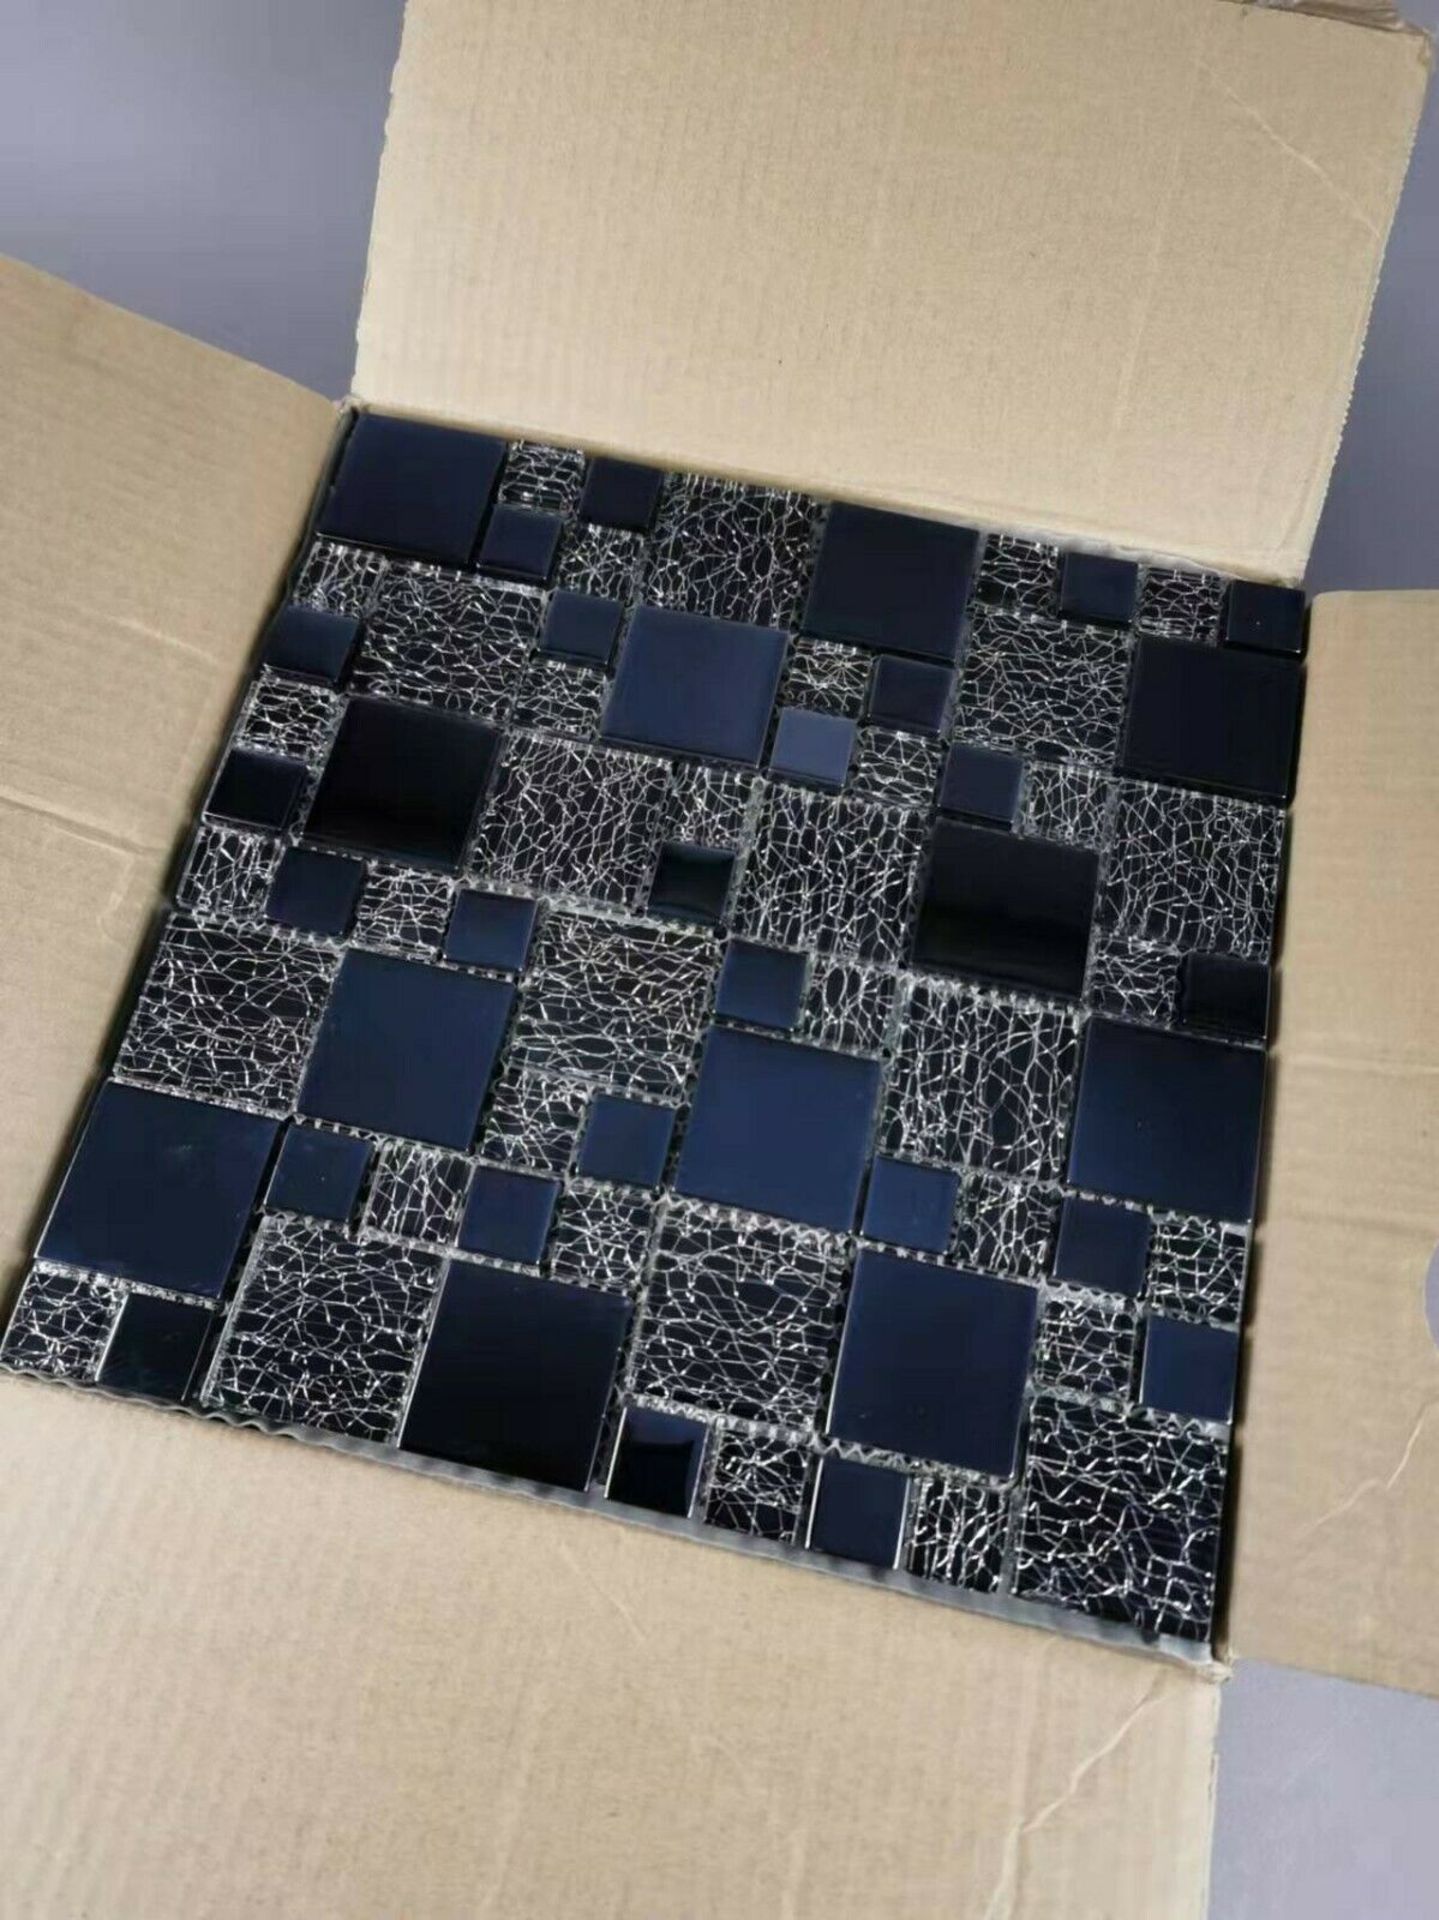 10 Square Metres - High Quality Glass/Stainless Steel Mosaic Tiles -110 sheets